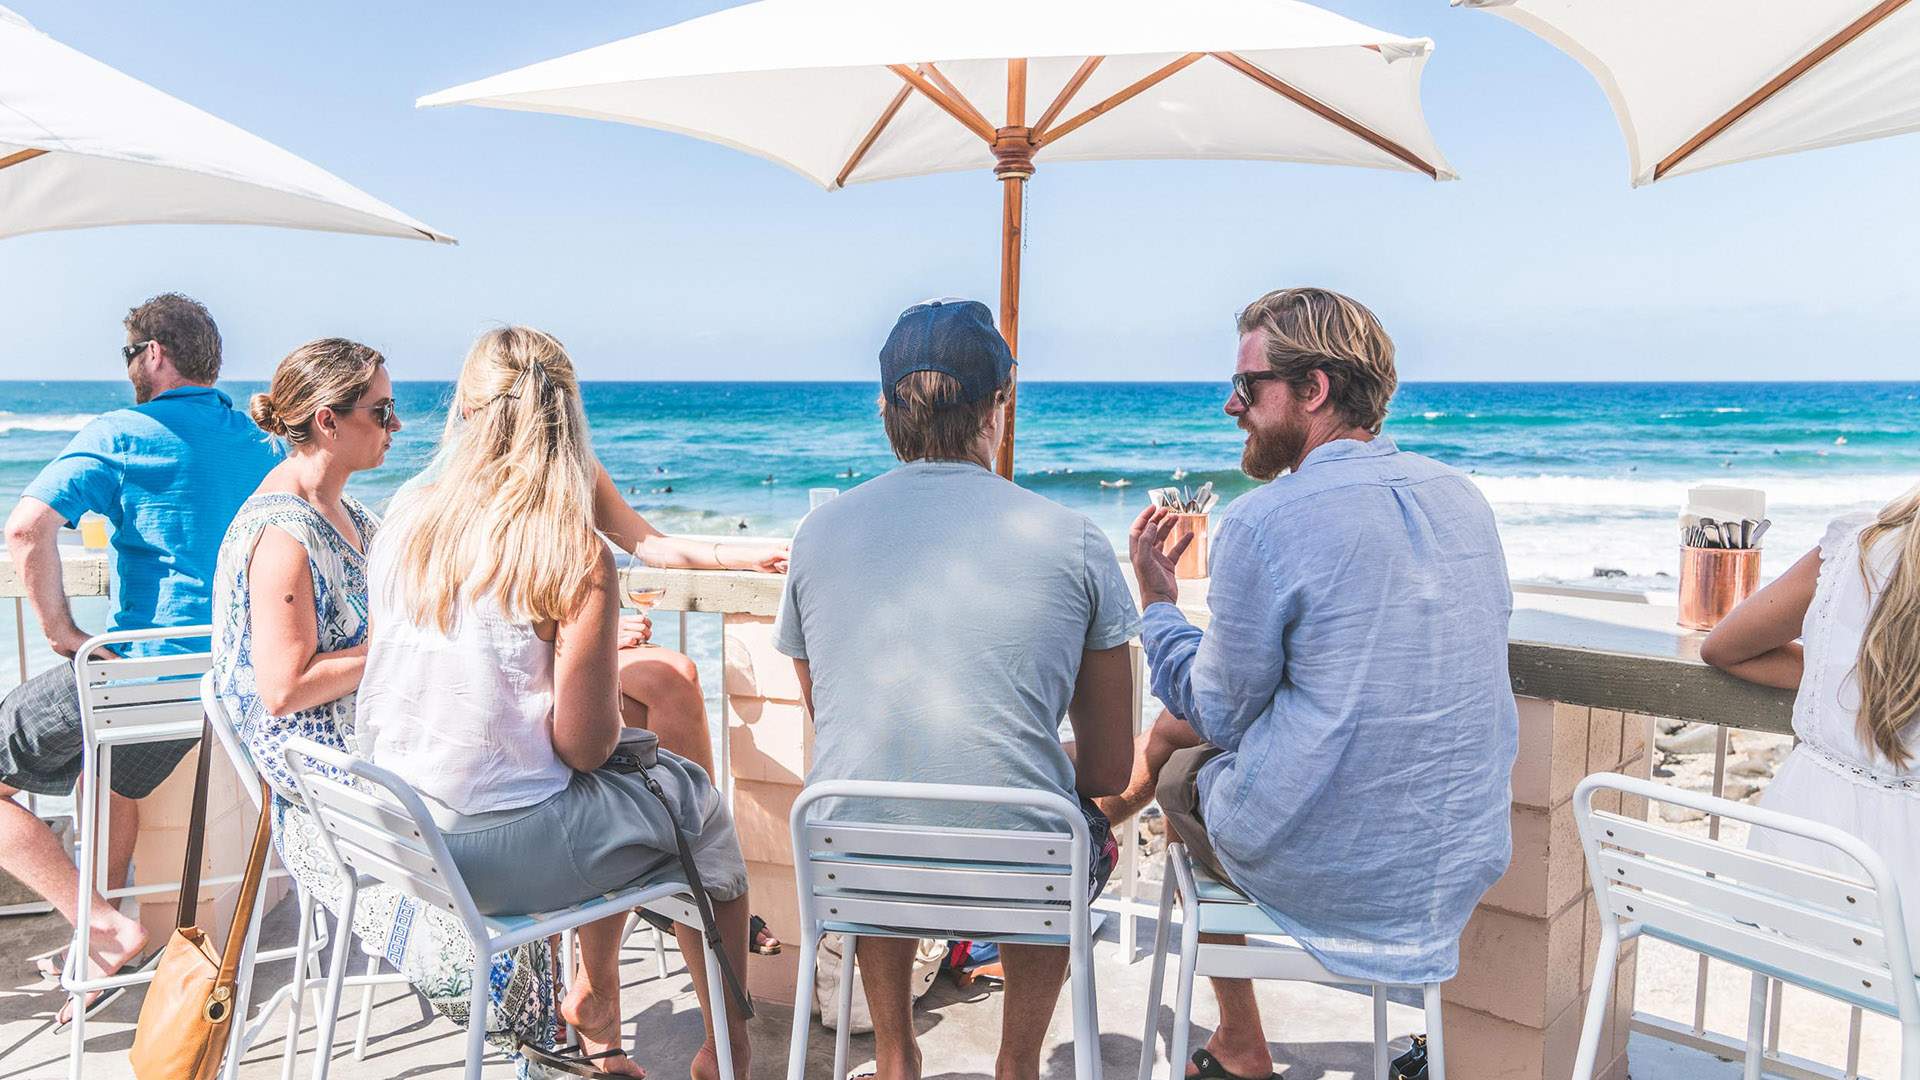 Burleigh Pavilion Is the Gold Coast's Huge New Beachfront Bar and Eatery